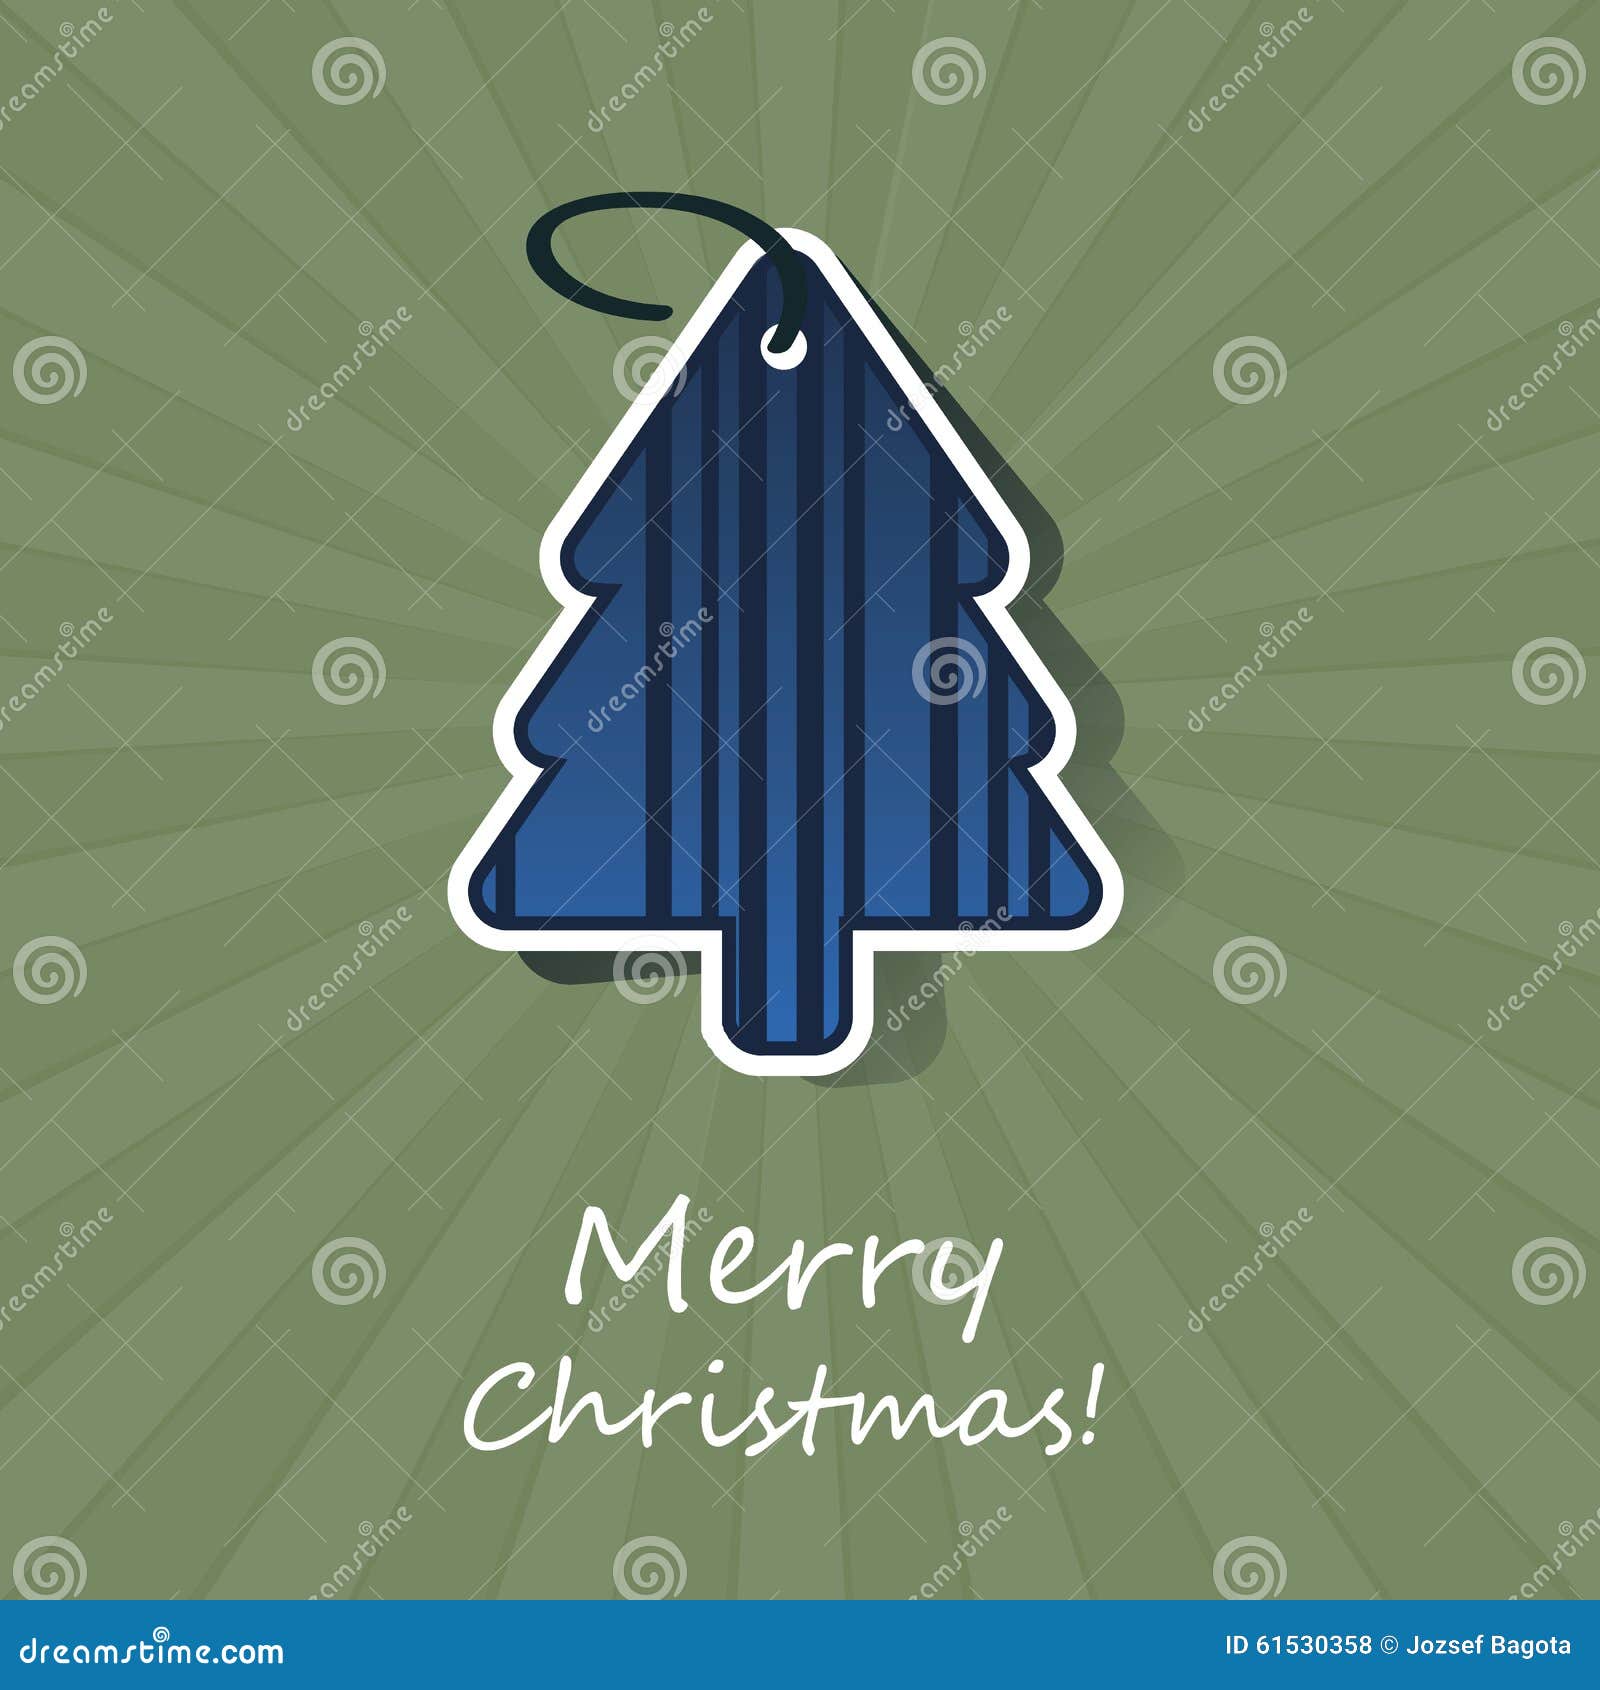 Christmas Card Or Cover Template Design With Blue Paper 